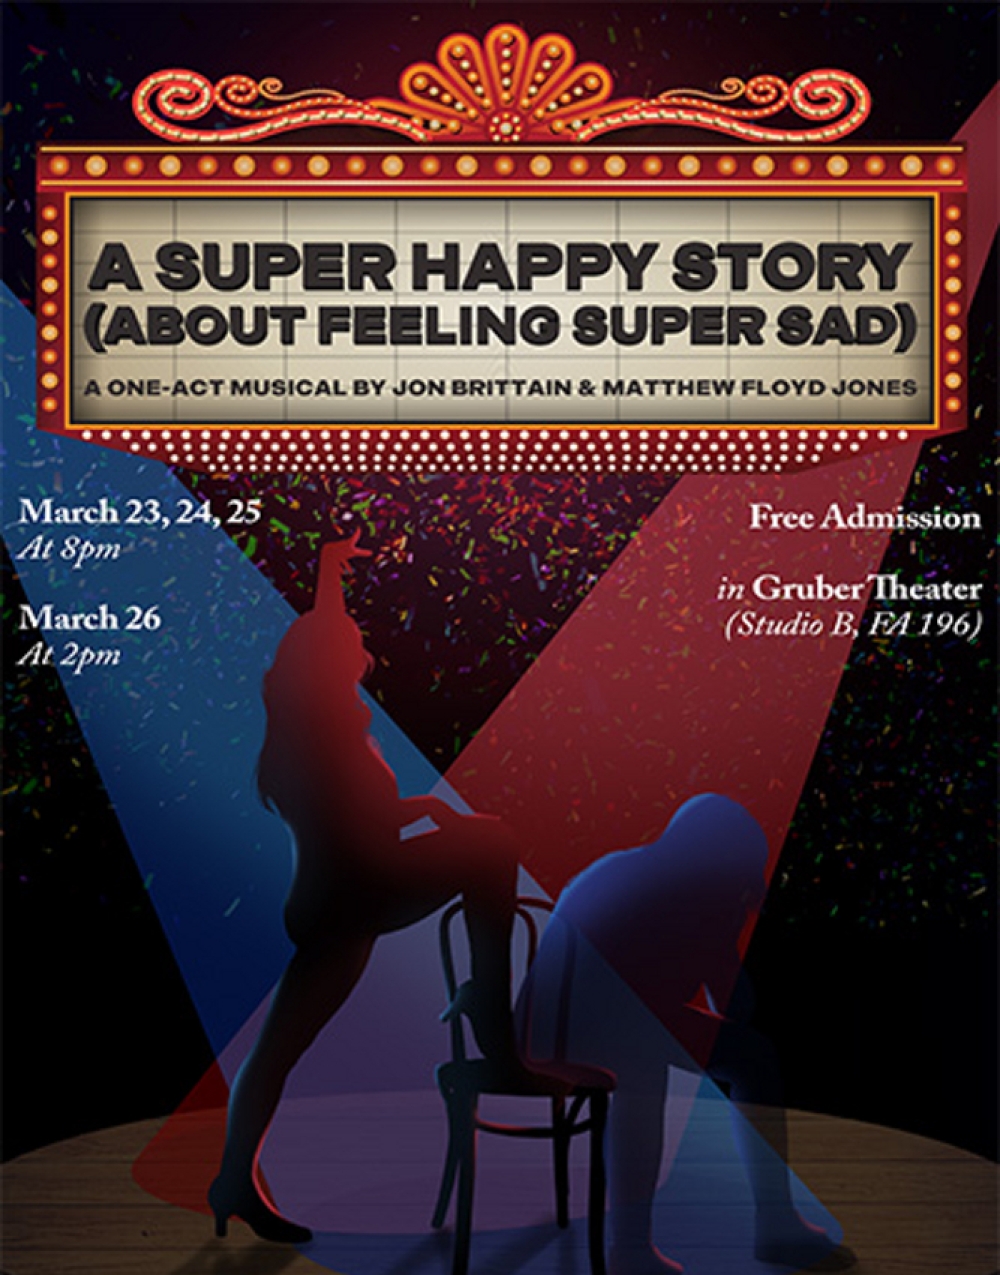 A Super Happy Story (About Being Super Sad) at Gruber Theater (Studio B, FA 196)